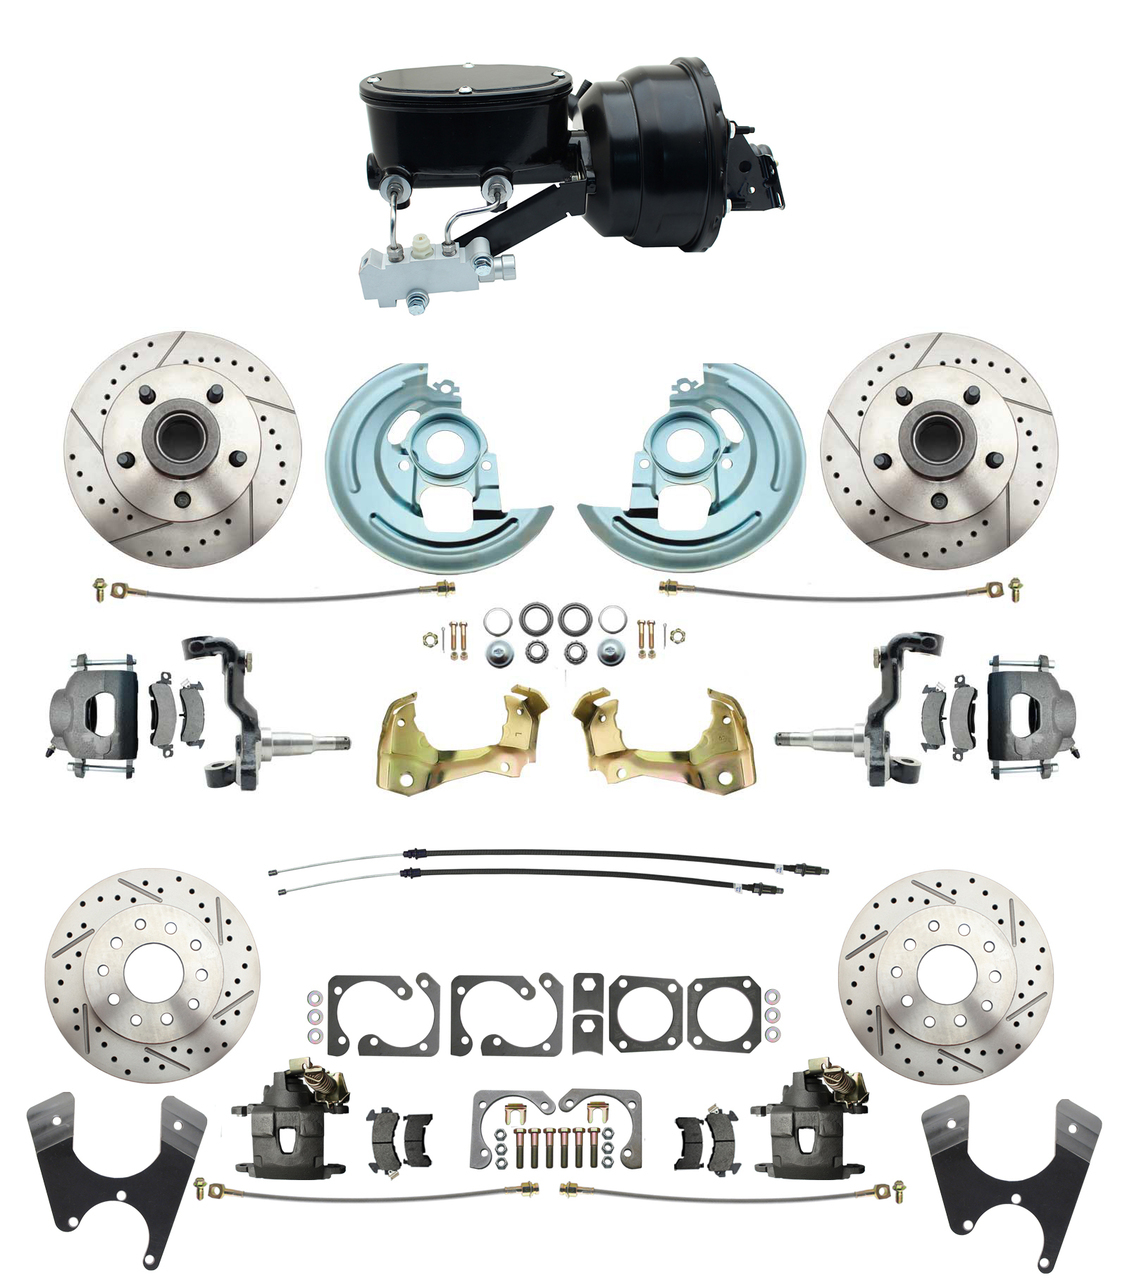 1967-1969 Camaro/ Firebird & 1968-1974 Chevy Nova Front & Rear Power Disc Brake Conversion Kit Drilled & Slotted Rotors W/ 8Dual Zinc Booster Kit W/ Wilwood Style 8 Dual Powder Coated Black Booster Kit